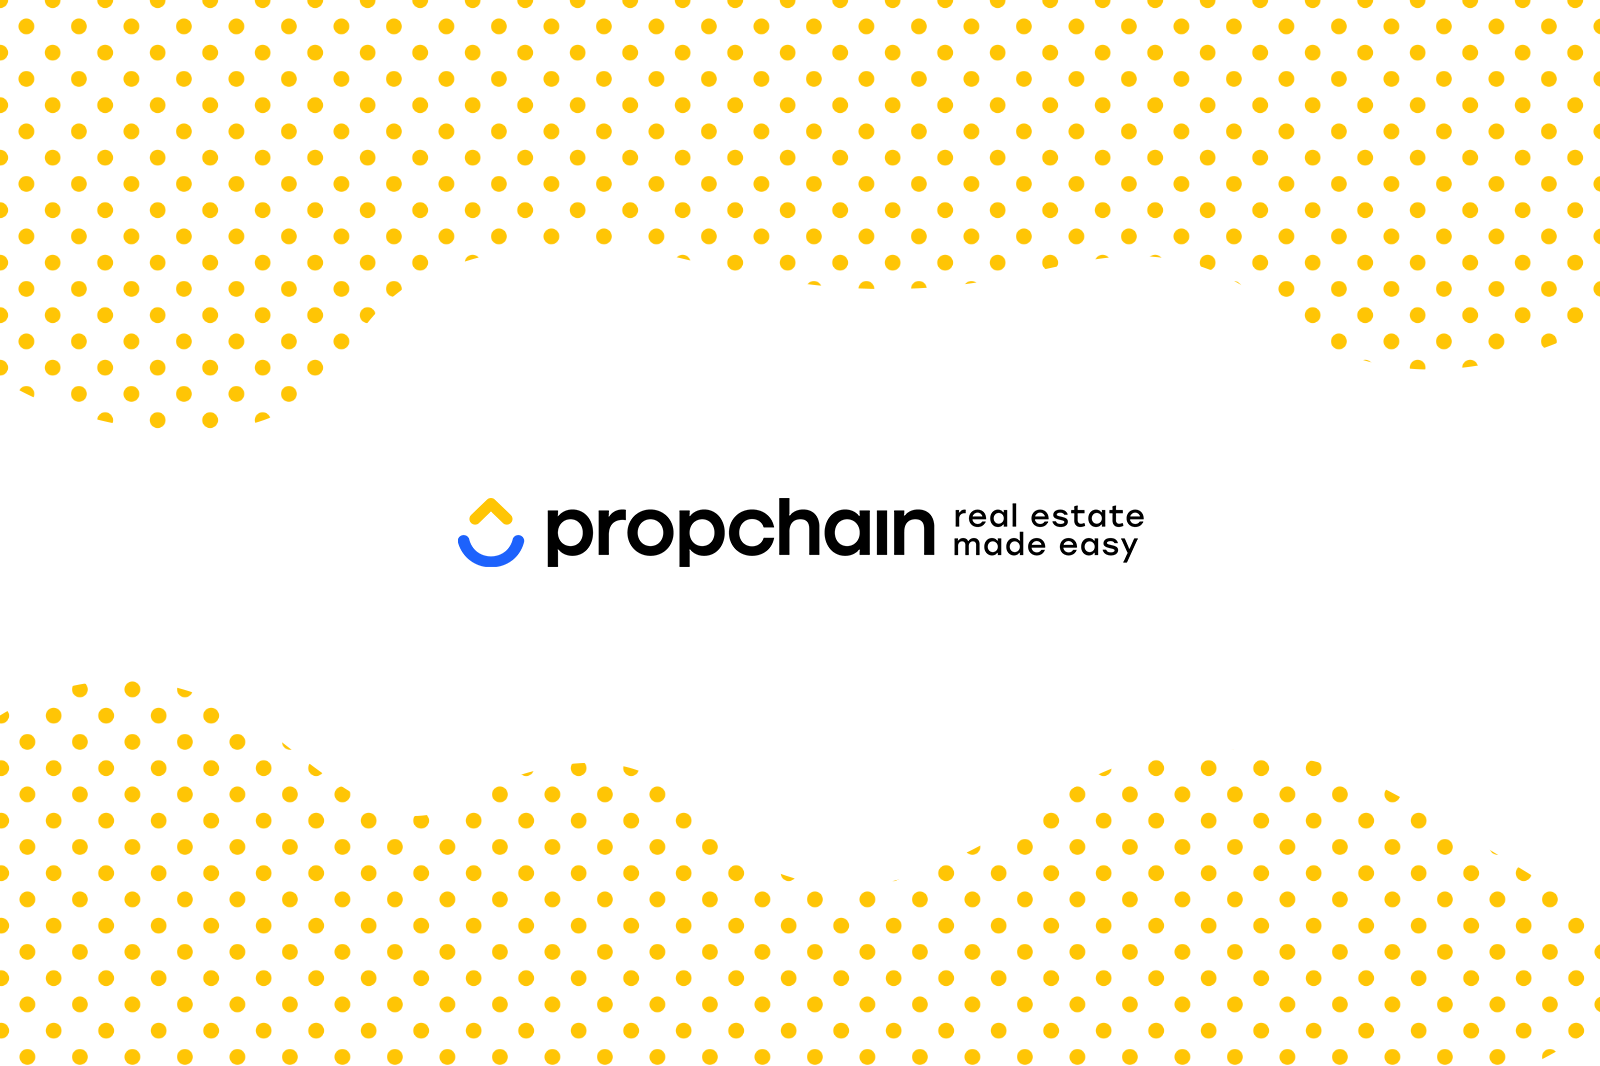 Introduction to Propchain